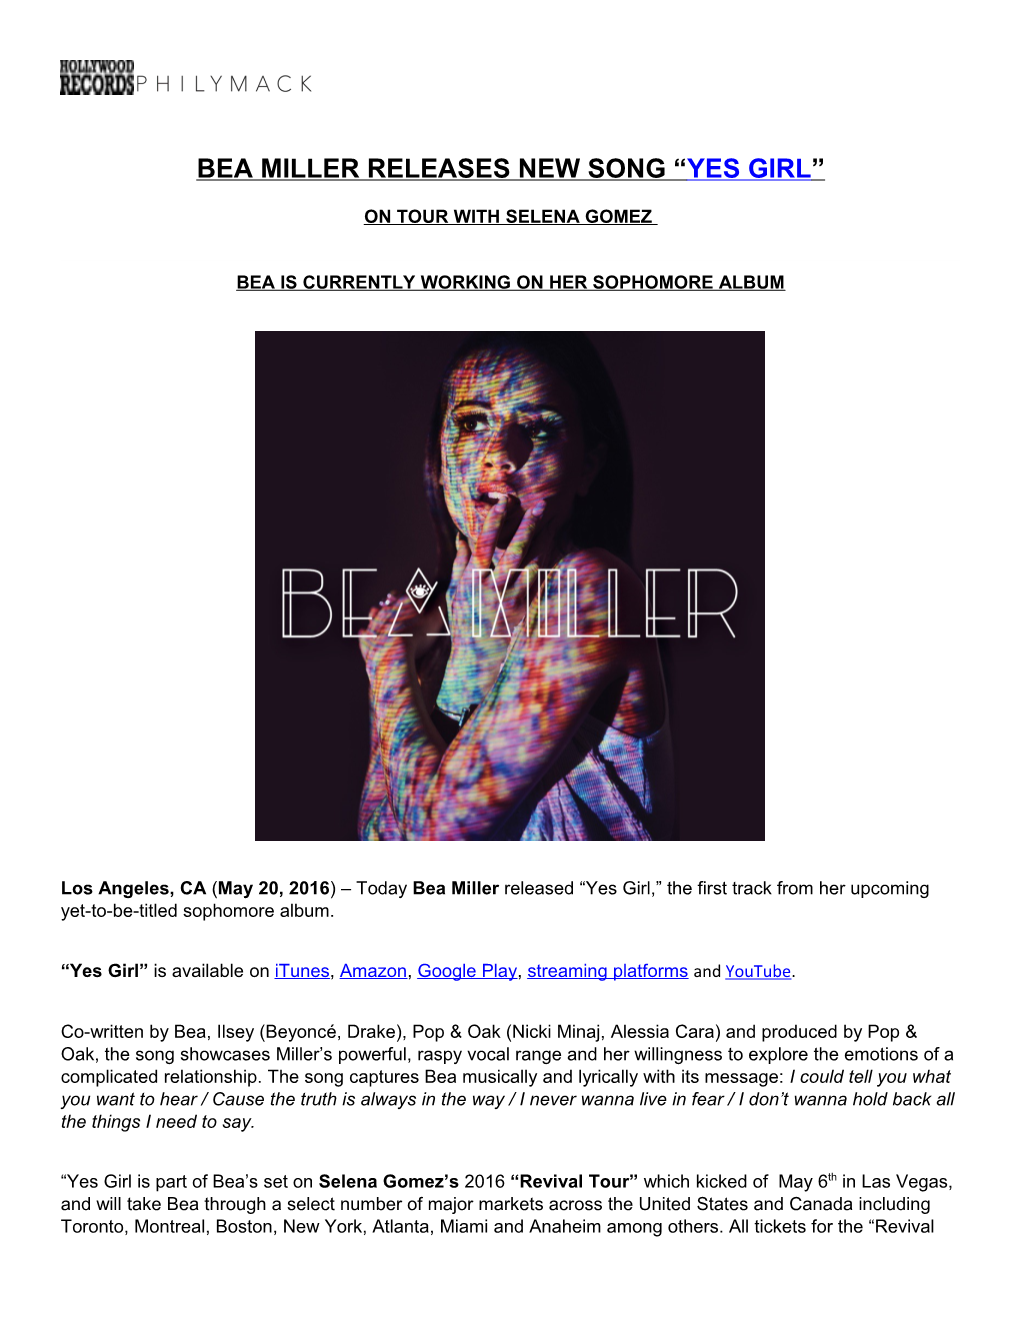 Bea Miller Releases New Song Yes Girl